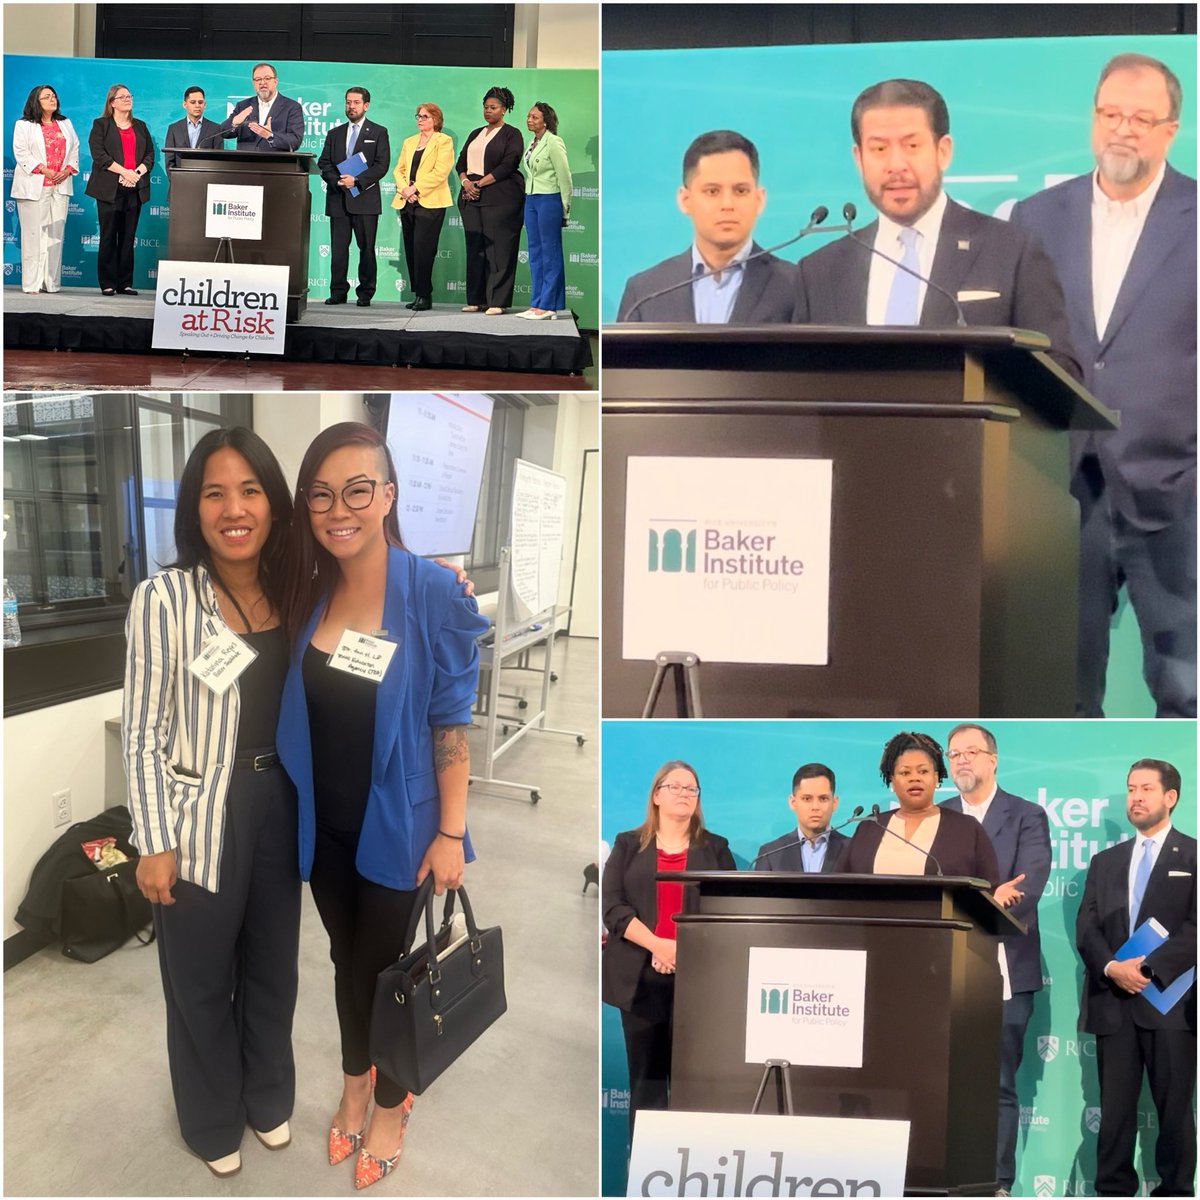 Latino Children’s Health in Harris County Precinct 2 Press Conference w/Commissioner Adrian Garcia, Drs. Sanborn & McKay. Excited about the #Latino Health Initiative Report (childrenatrisk.org/wp-content/upl…) Thank you @BakerInstitute & @ChildrenAtRisk for the closed invitational luncheon